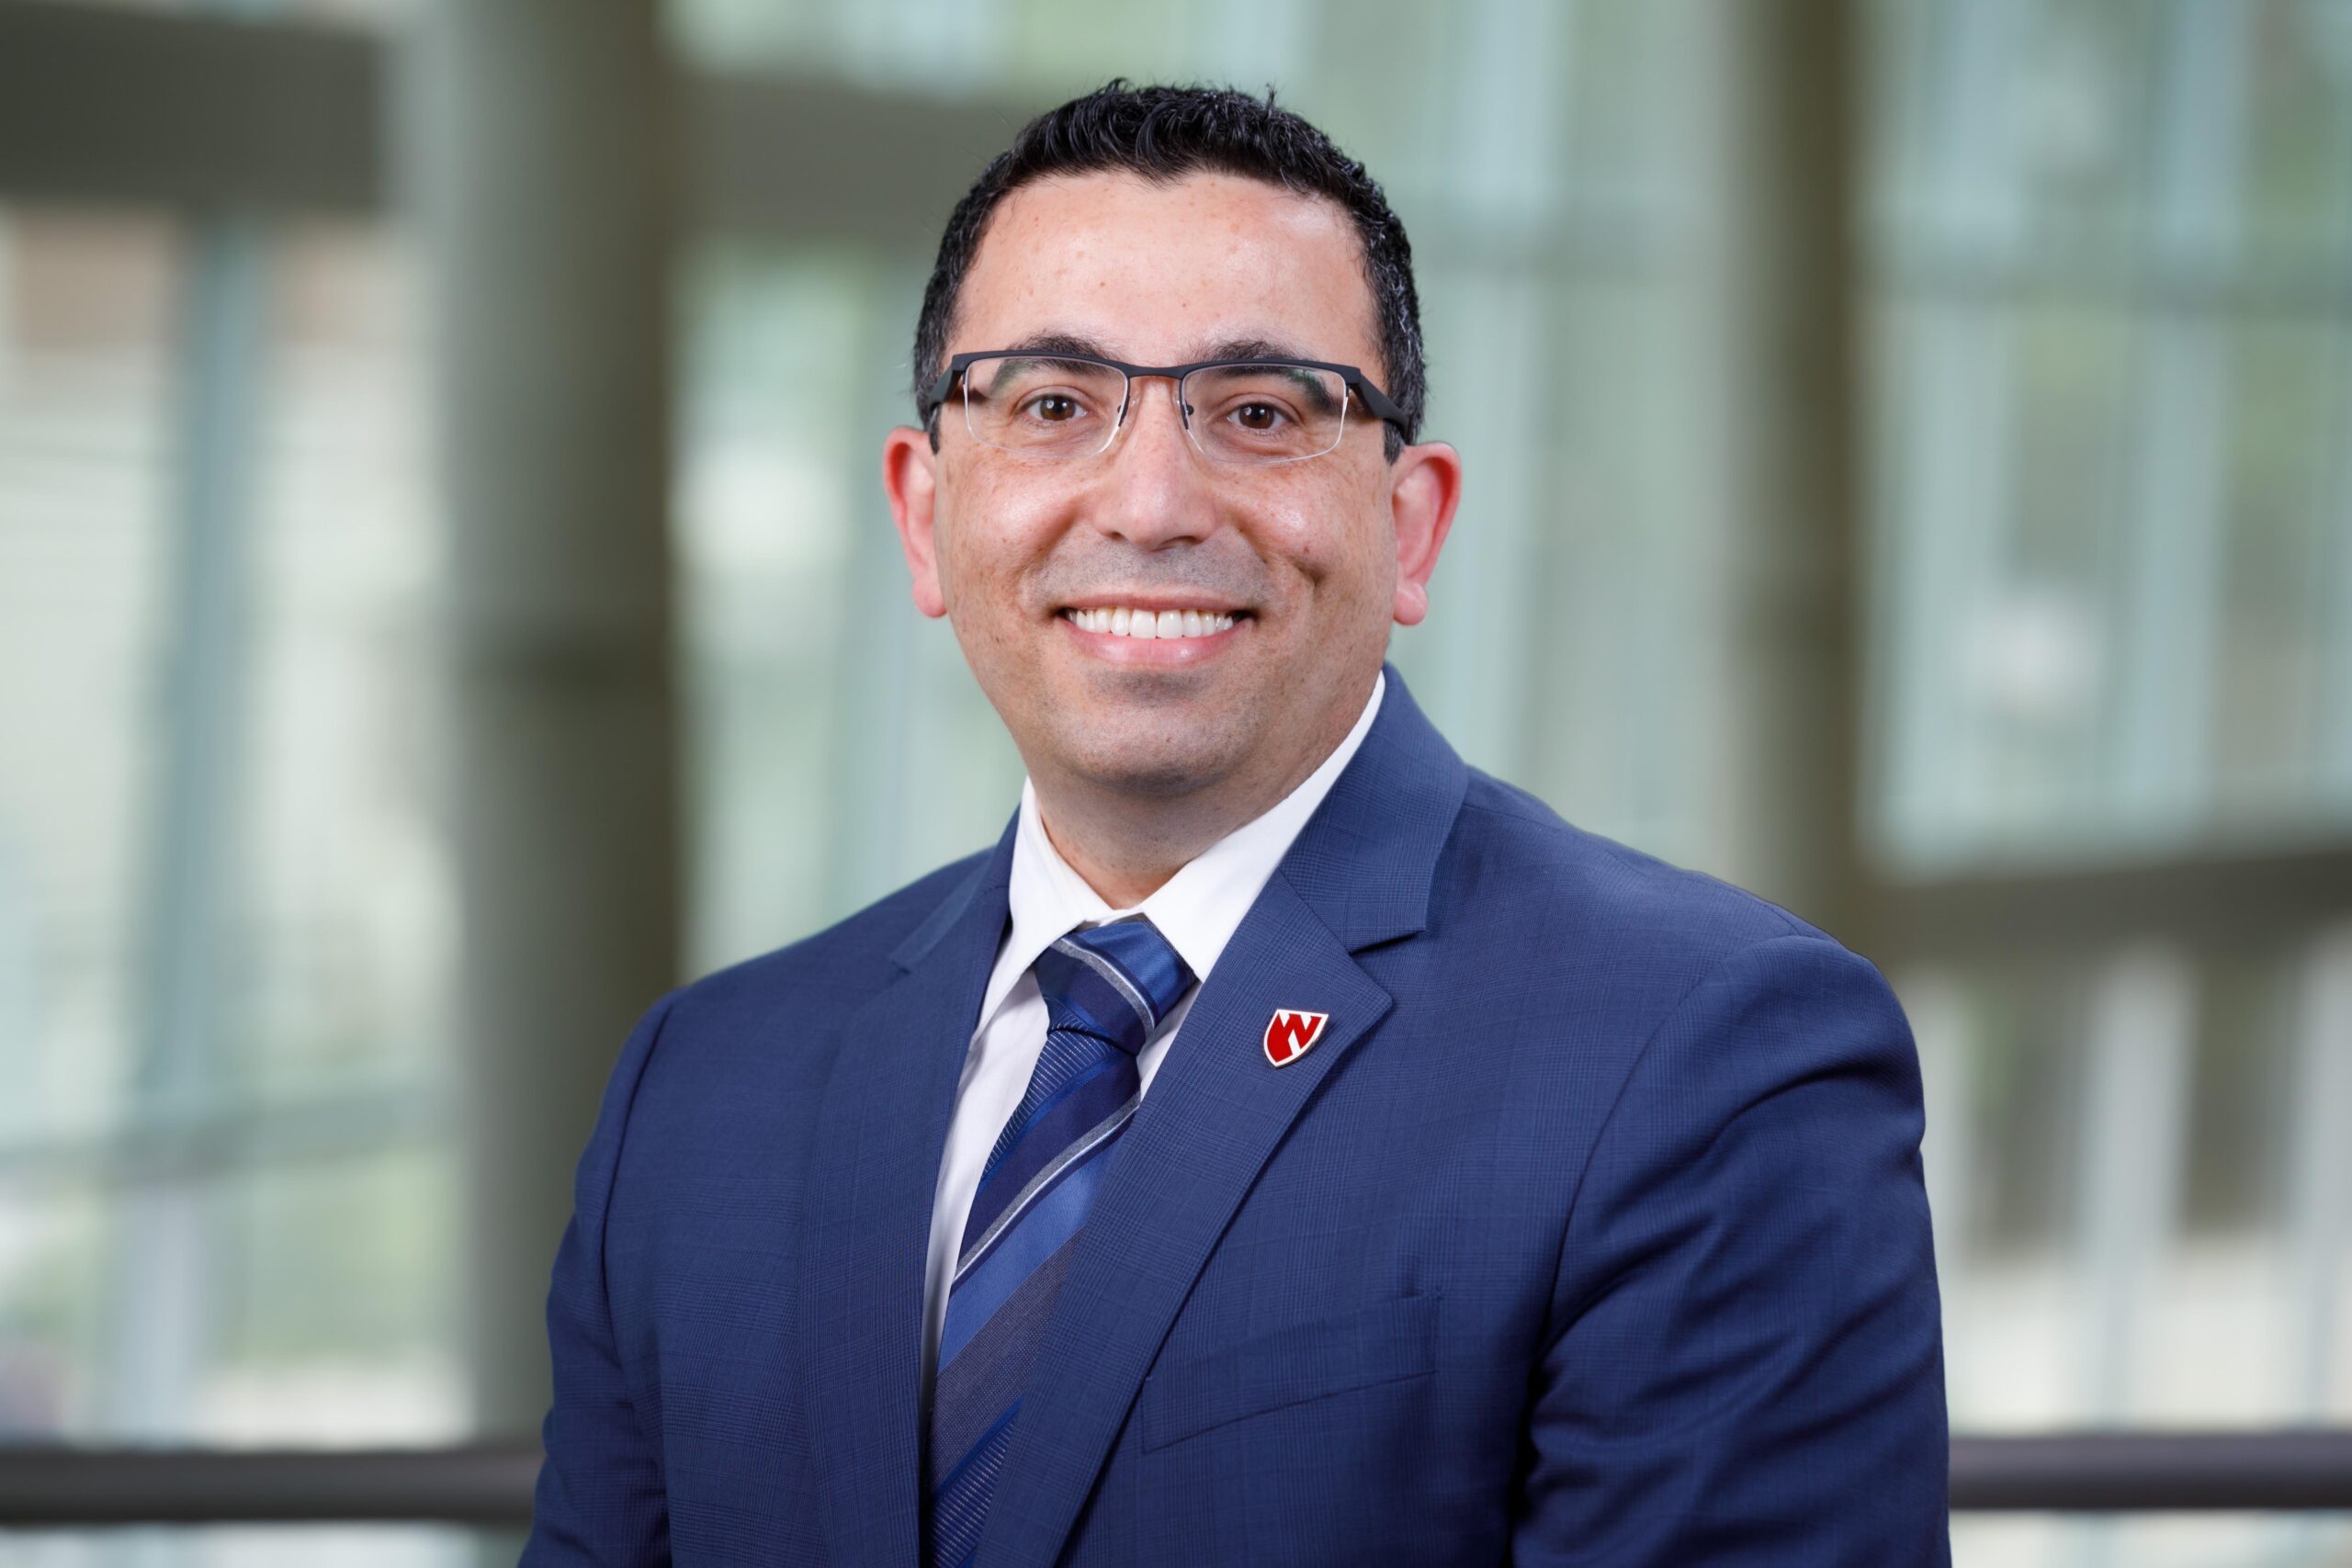 Dr. Khoury named to WHO Classification of Tumors leadership role